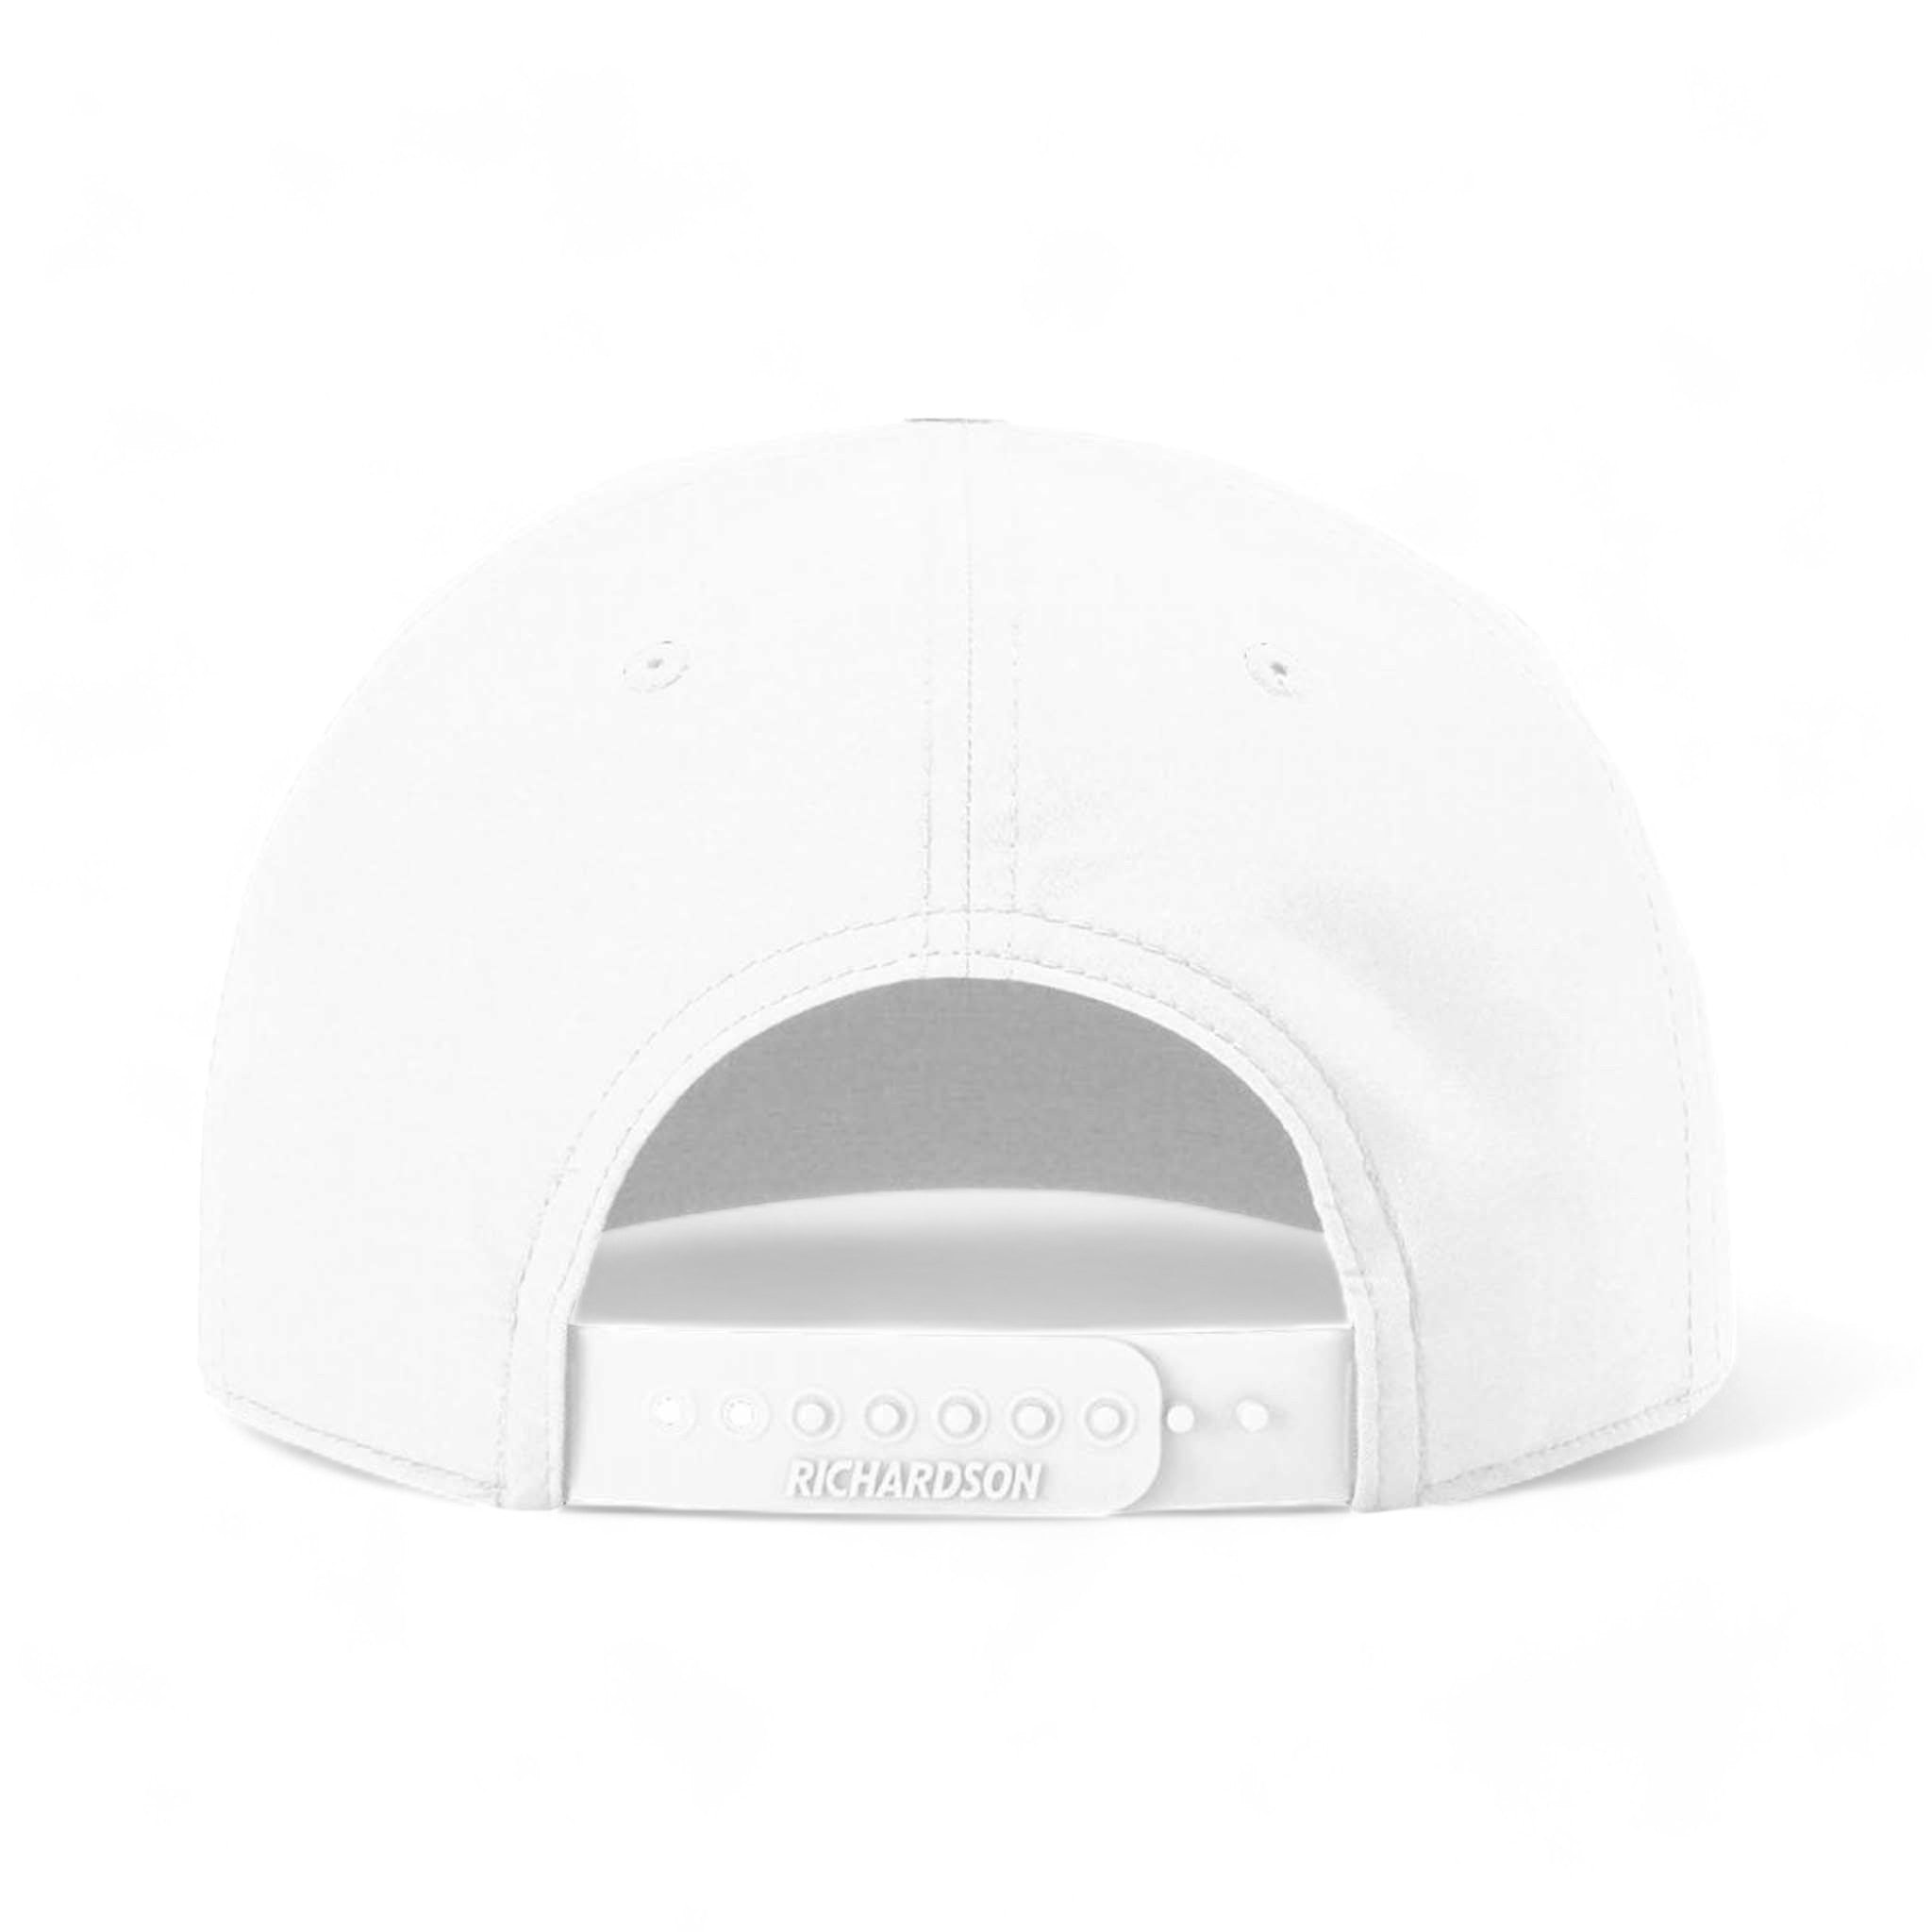 Back view of Richardson 258 custom hat in white and navy